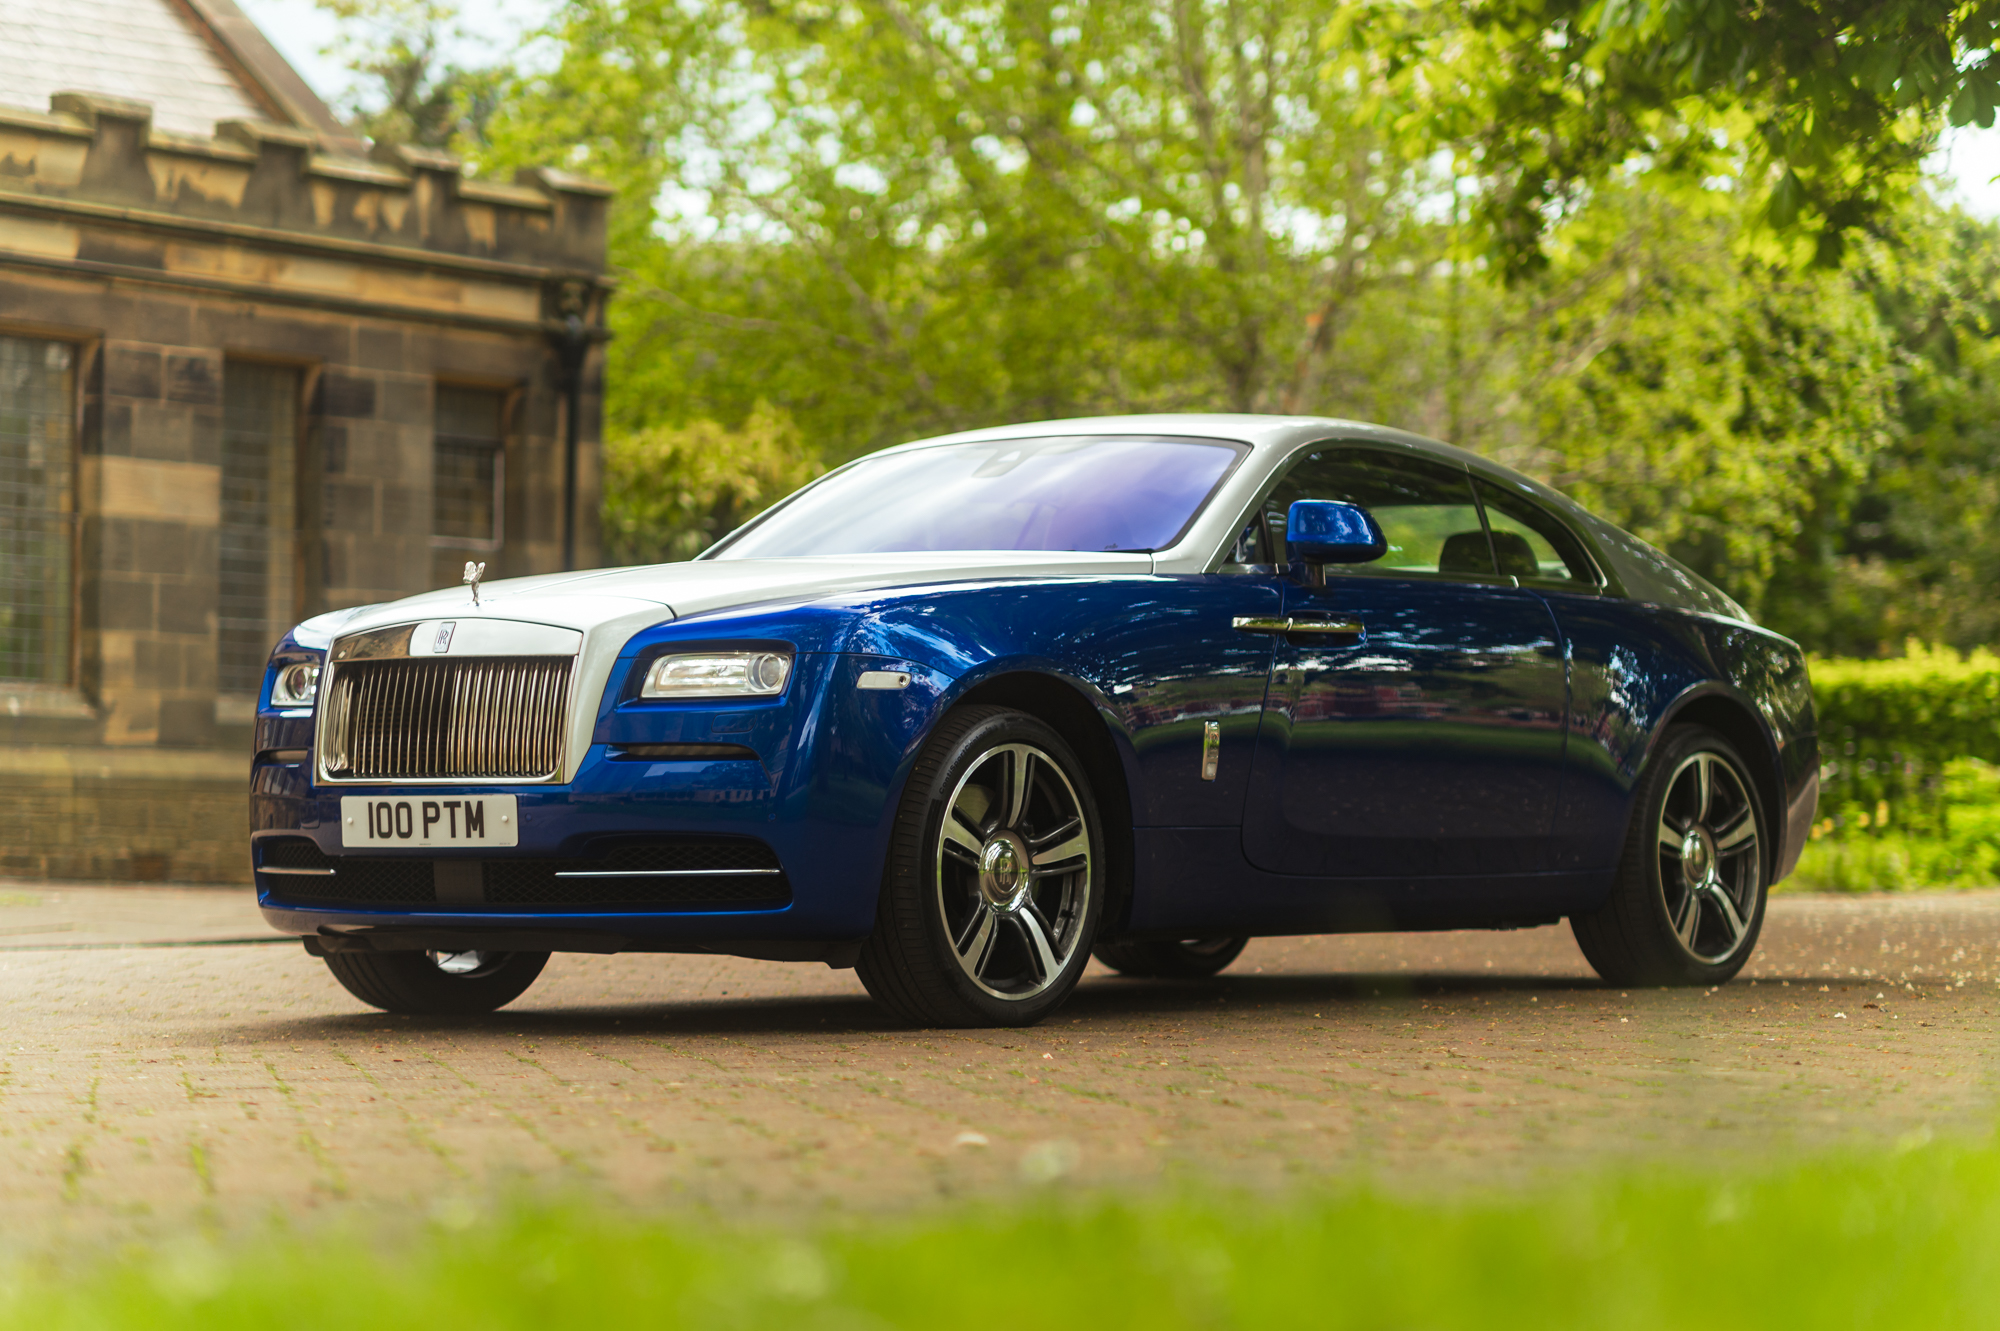 2021 RollsRoyce Motor Prices and Reviews in Nigeria